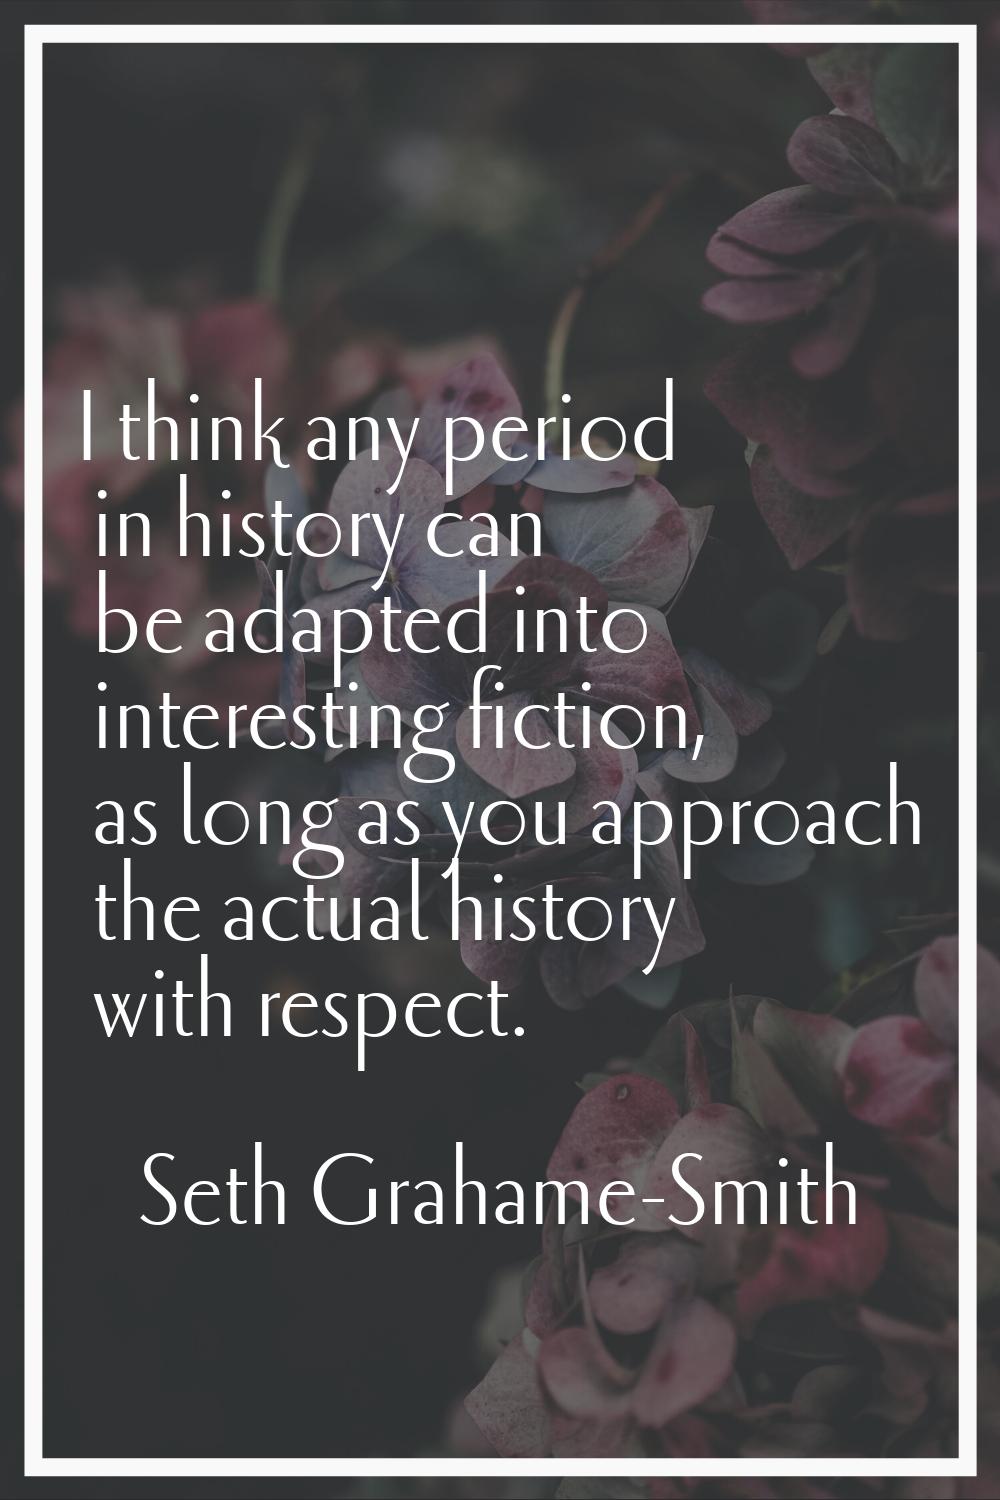 I think any period in history can be adapted into interesting fiction, as long as you approach the 